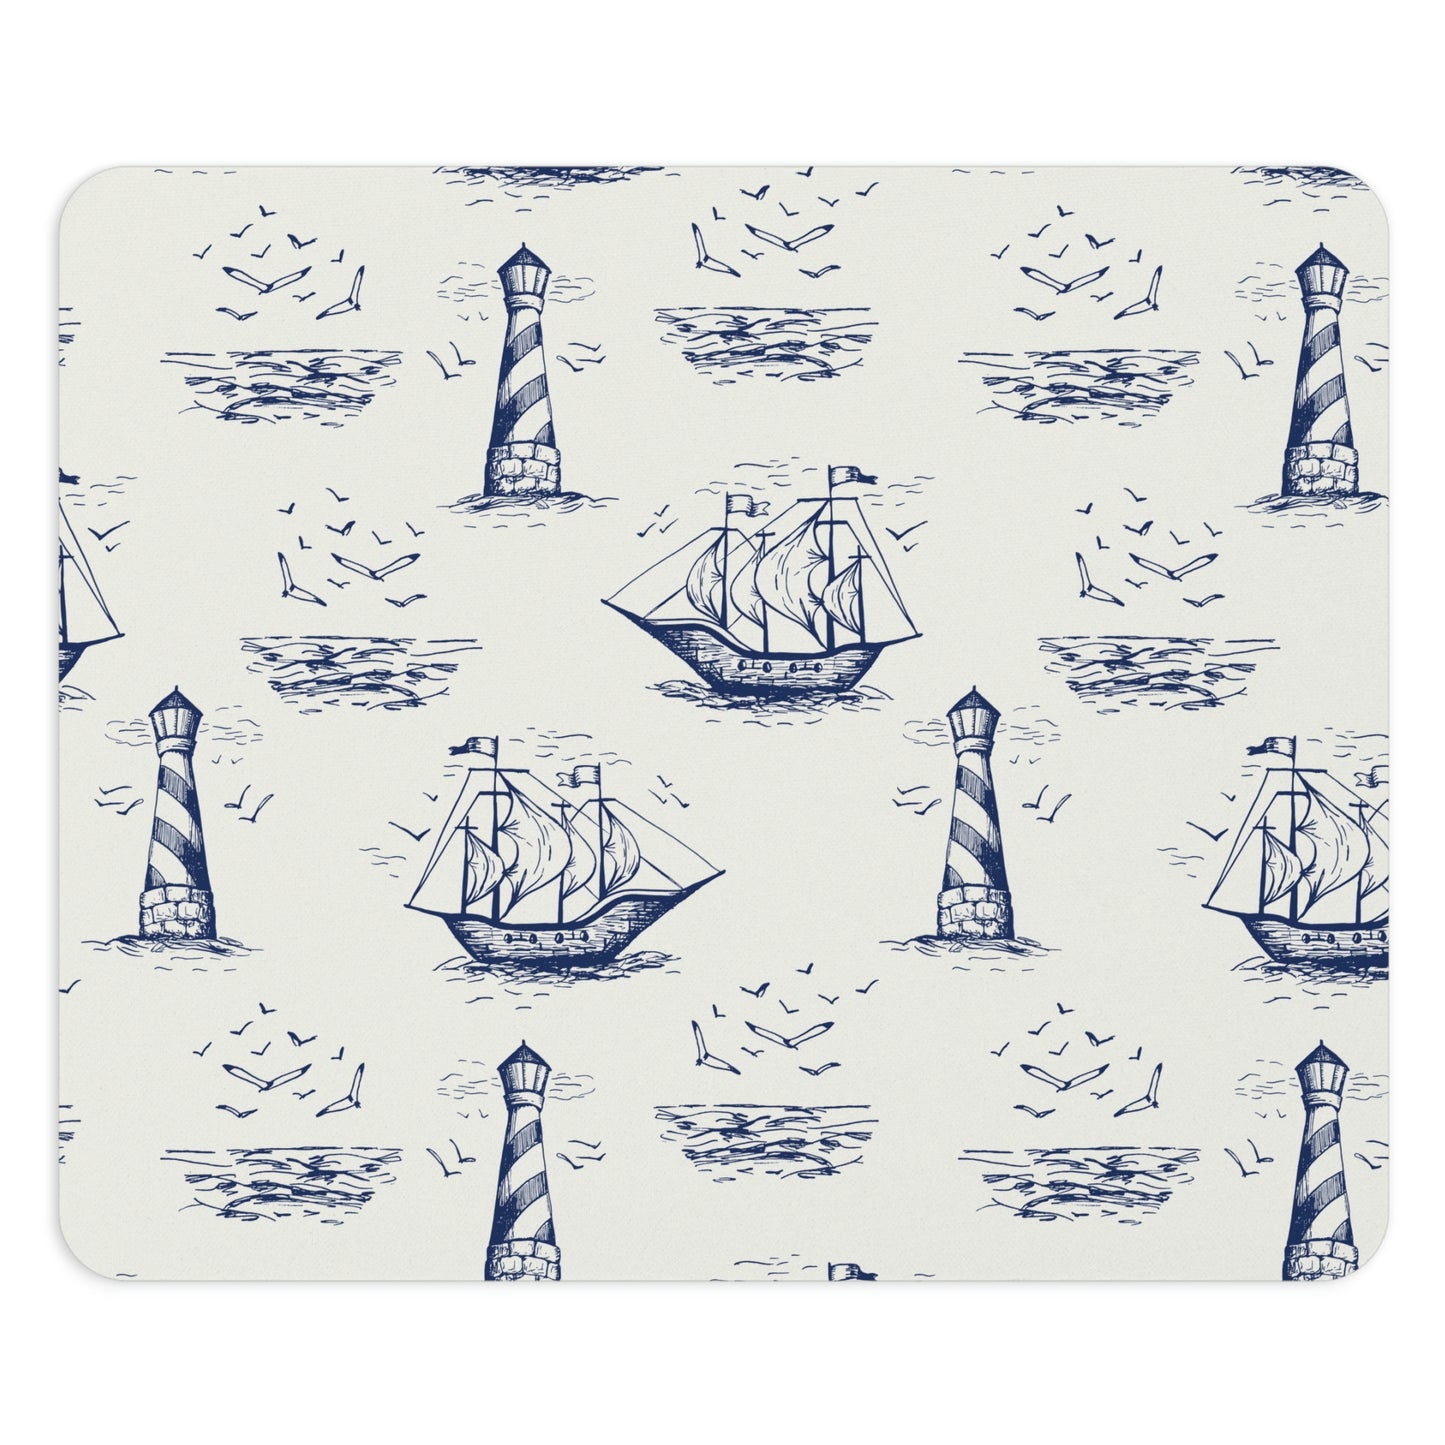 Vintage Ships Mouse Pad